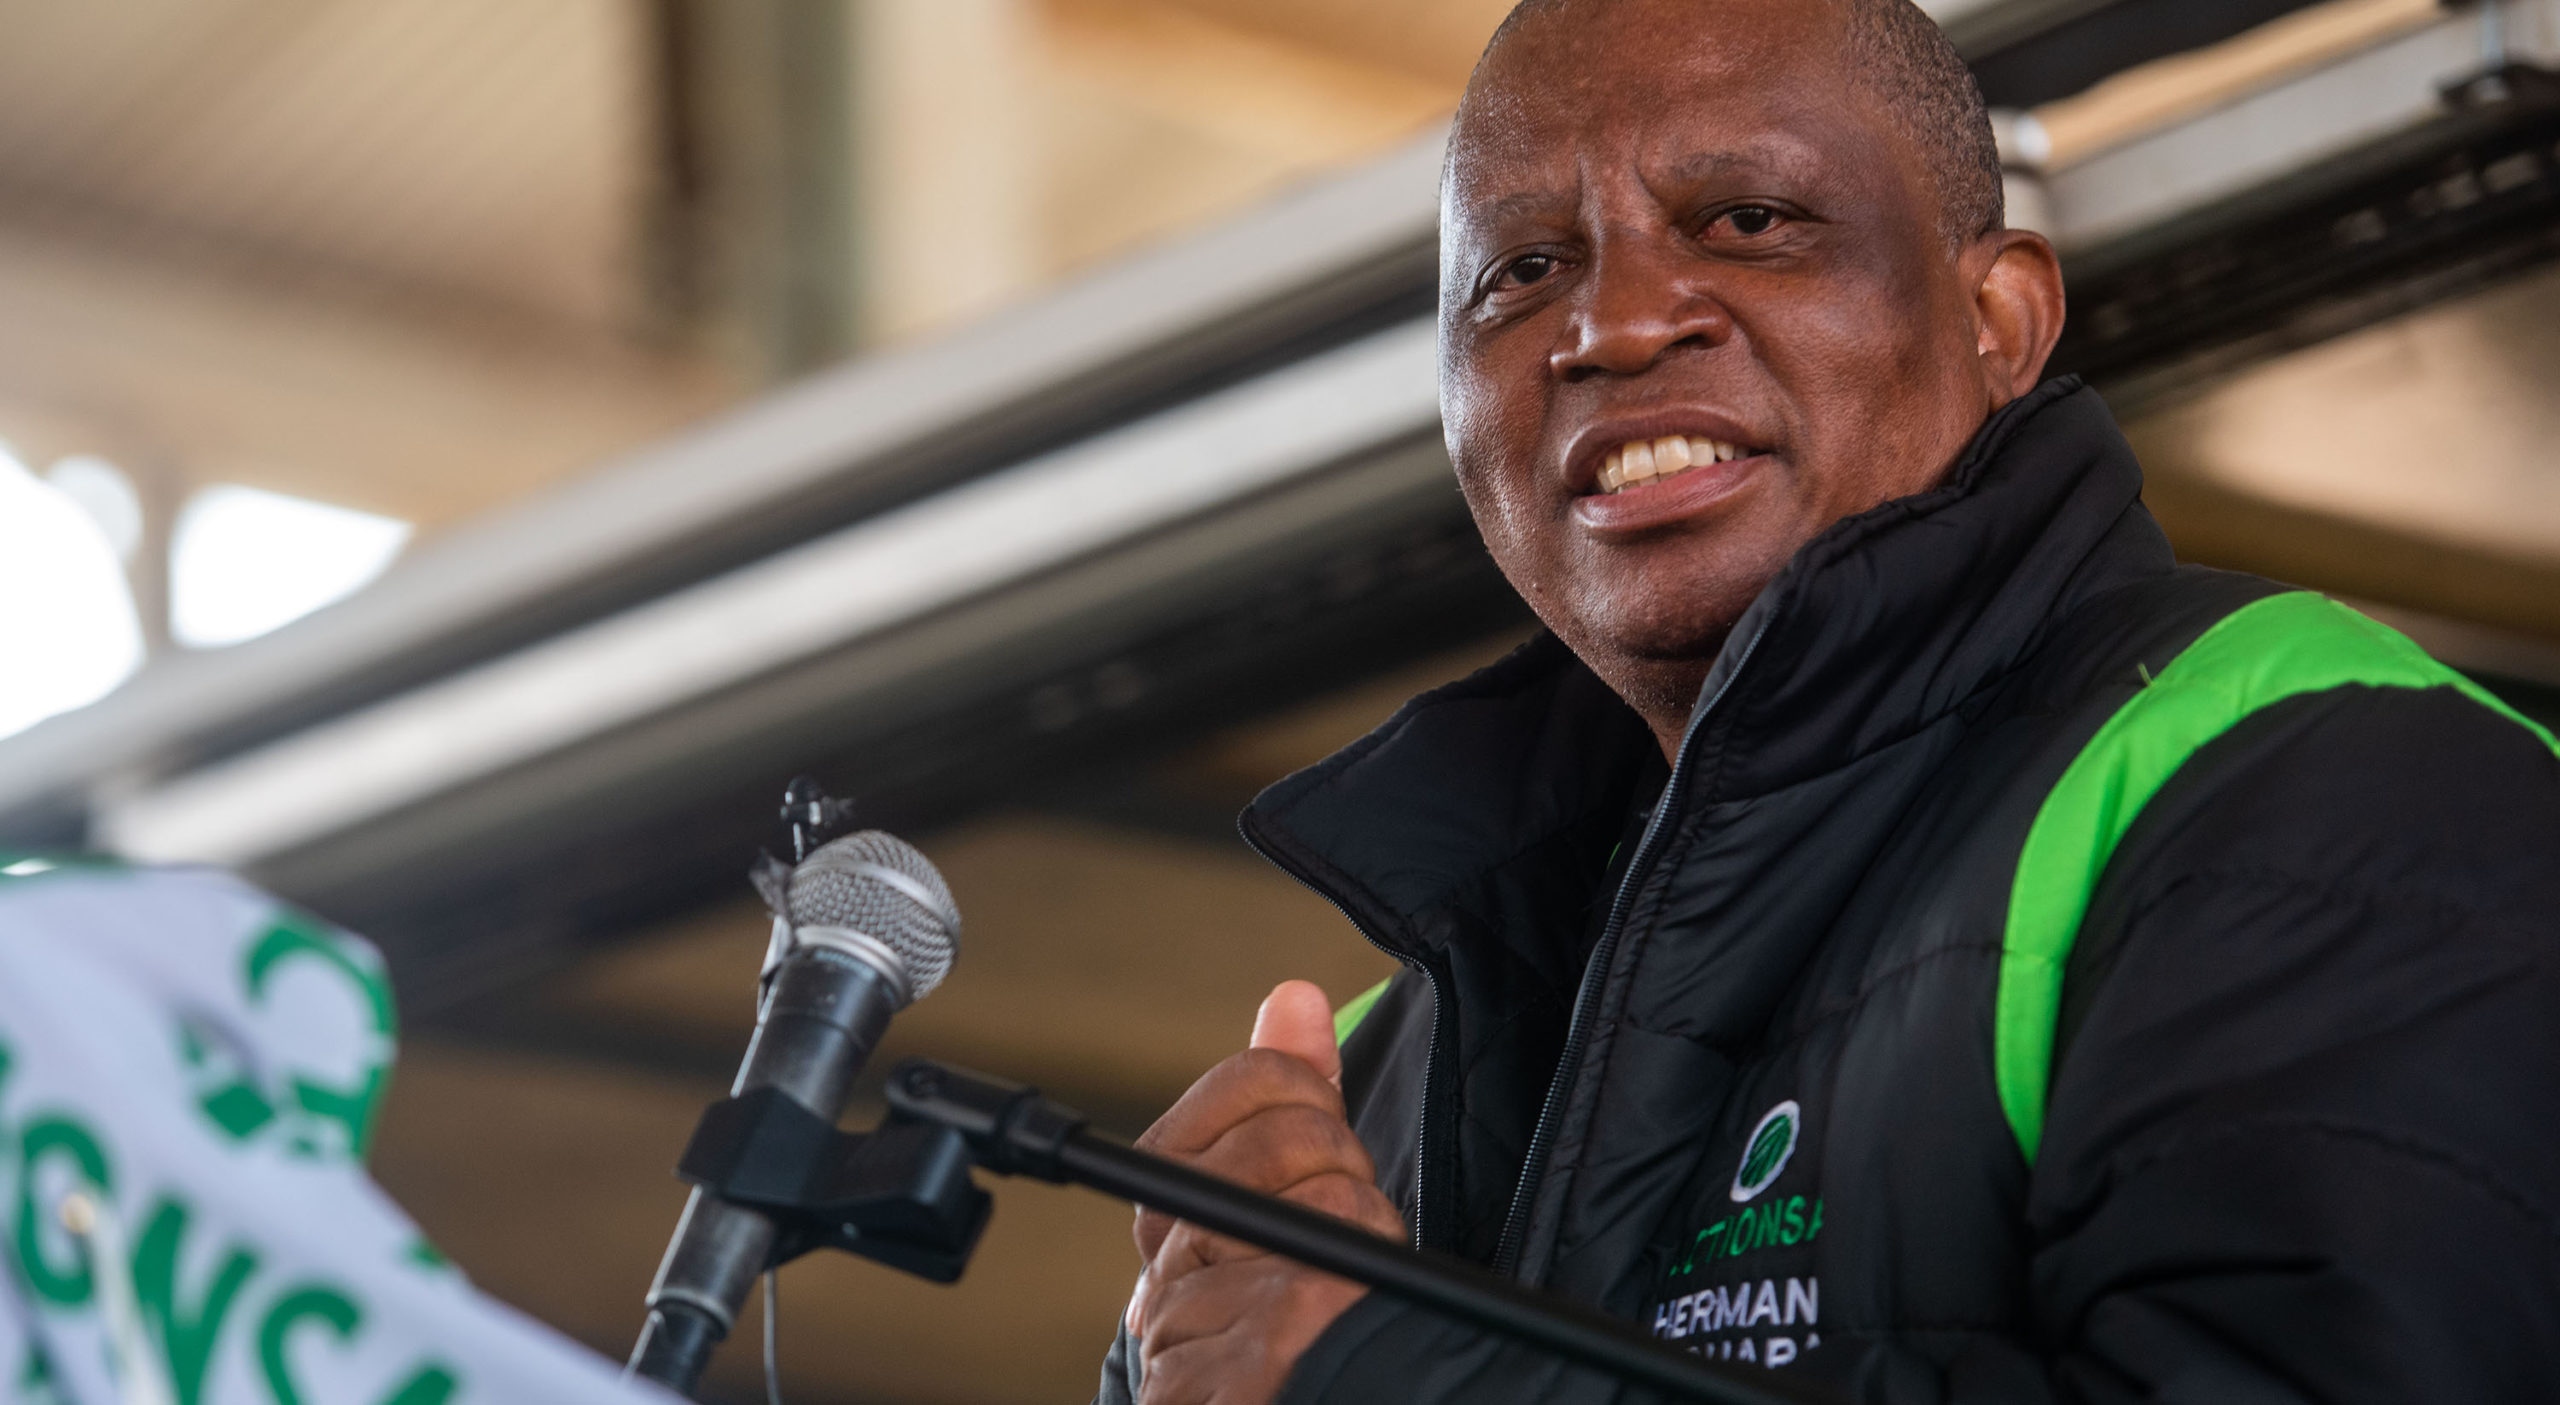 Road to 2021 Local Elections: Analysis: ActionSA is poised for a decent first showing in elections, despite some questionable claims